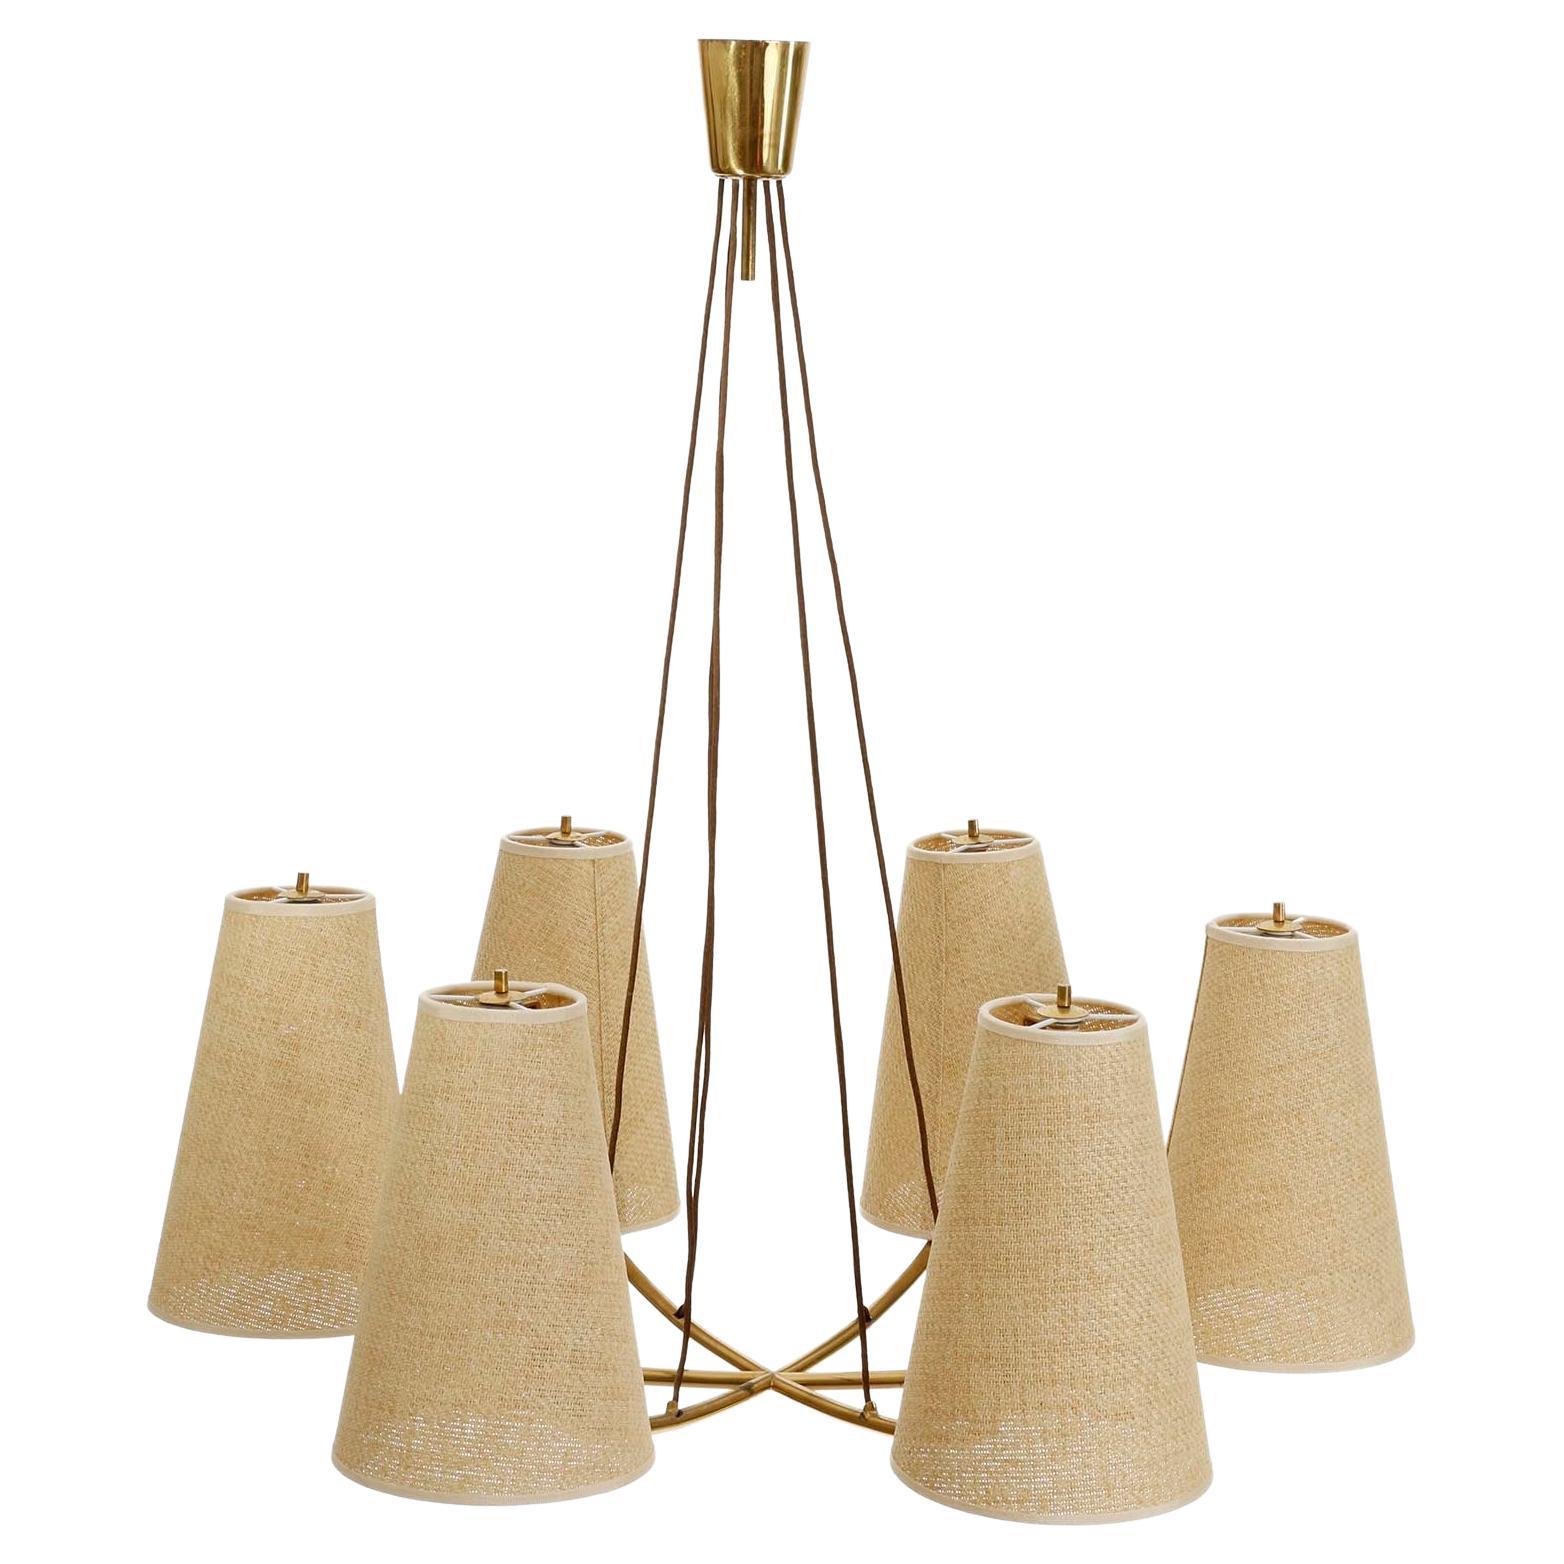 One of two large pendant lamps model no. 3635/6 'Mexiko' (engl. Mexico) by J.T. Kalmar, Austria, 1960s.
A brass star with six arms and cone shaped wicker or cane shades. Each chandelier has six sockets for medium or standard screw base bulbs.
The